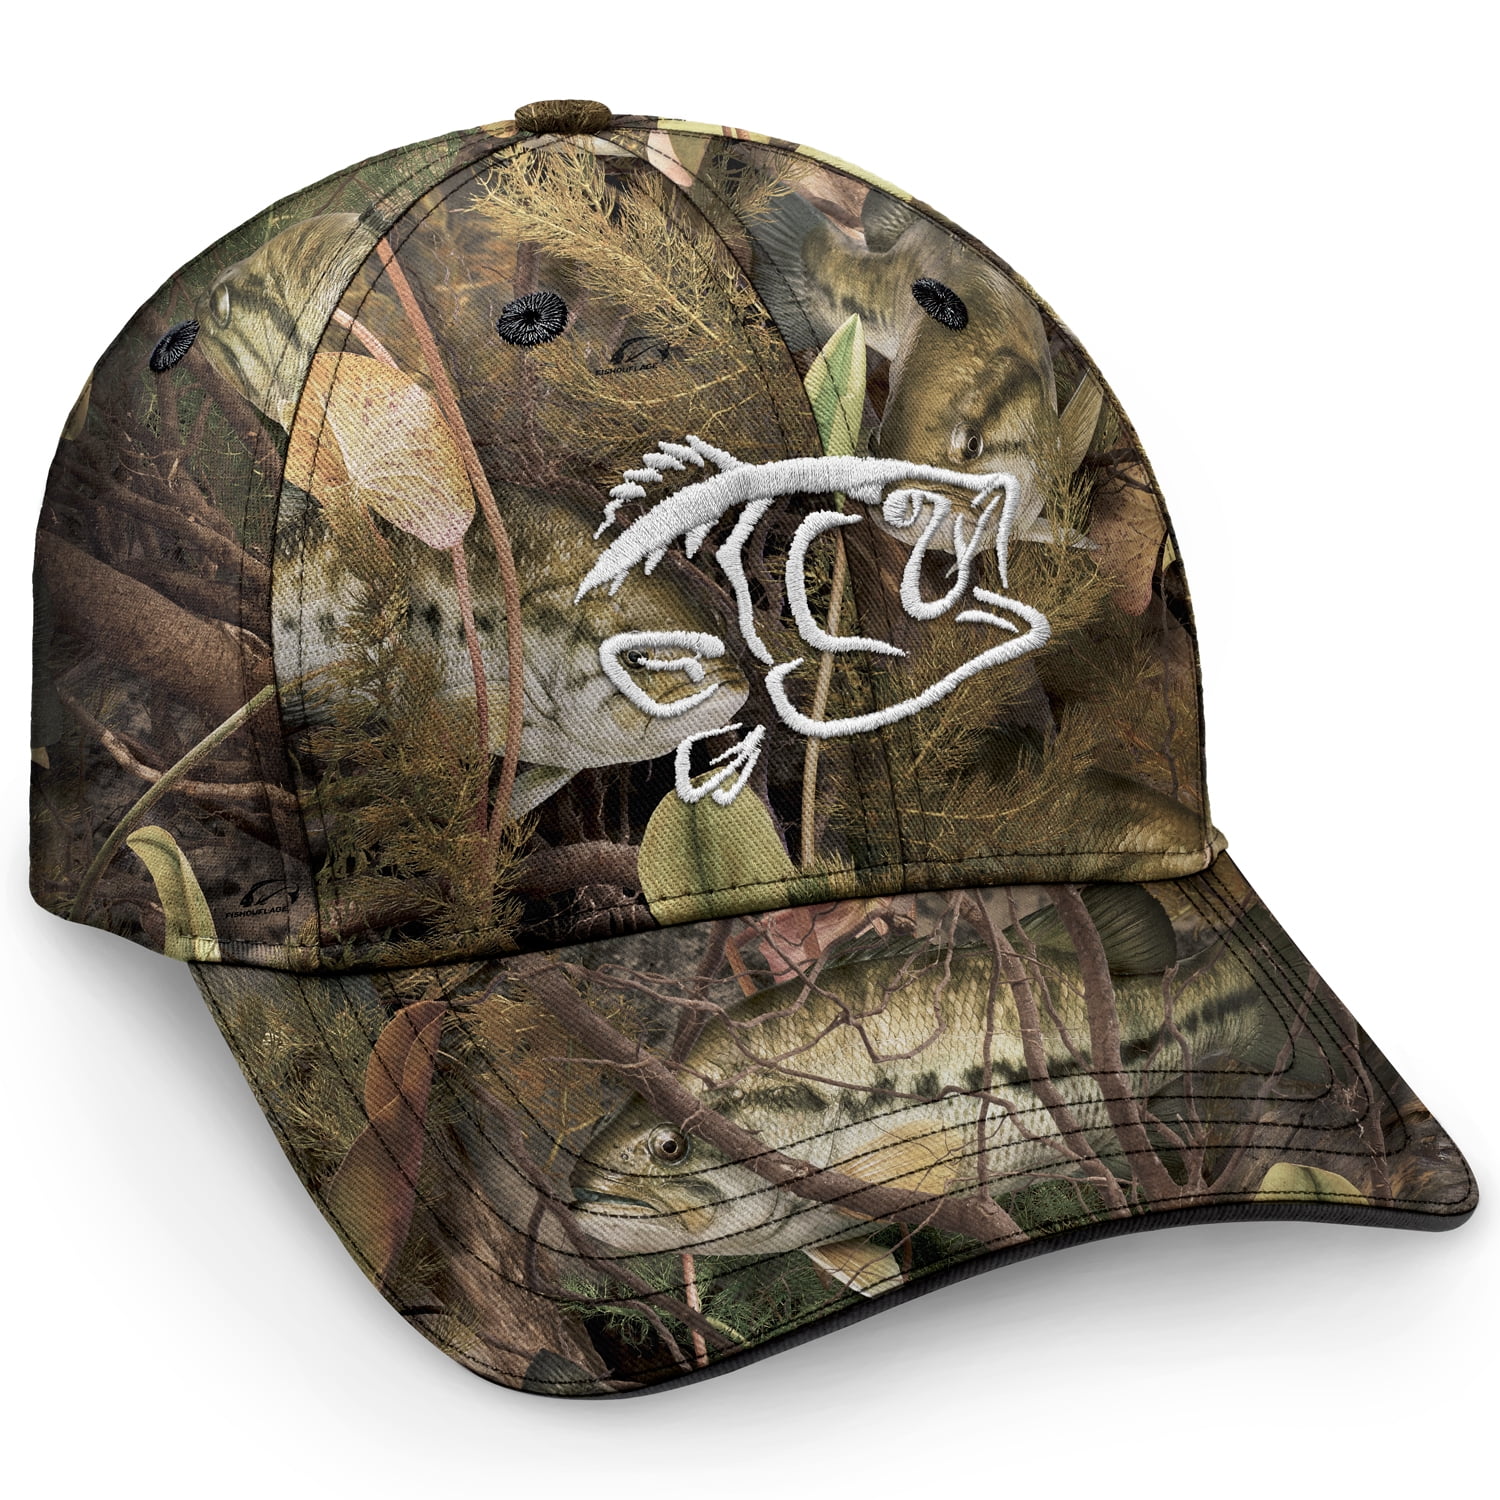 Realtree Advantage Classic Camo Embroidered Logo 6 Panel Hunting Hat